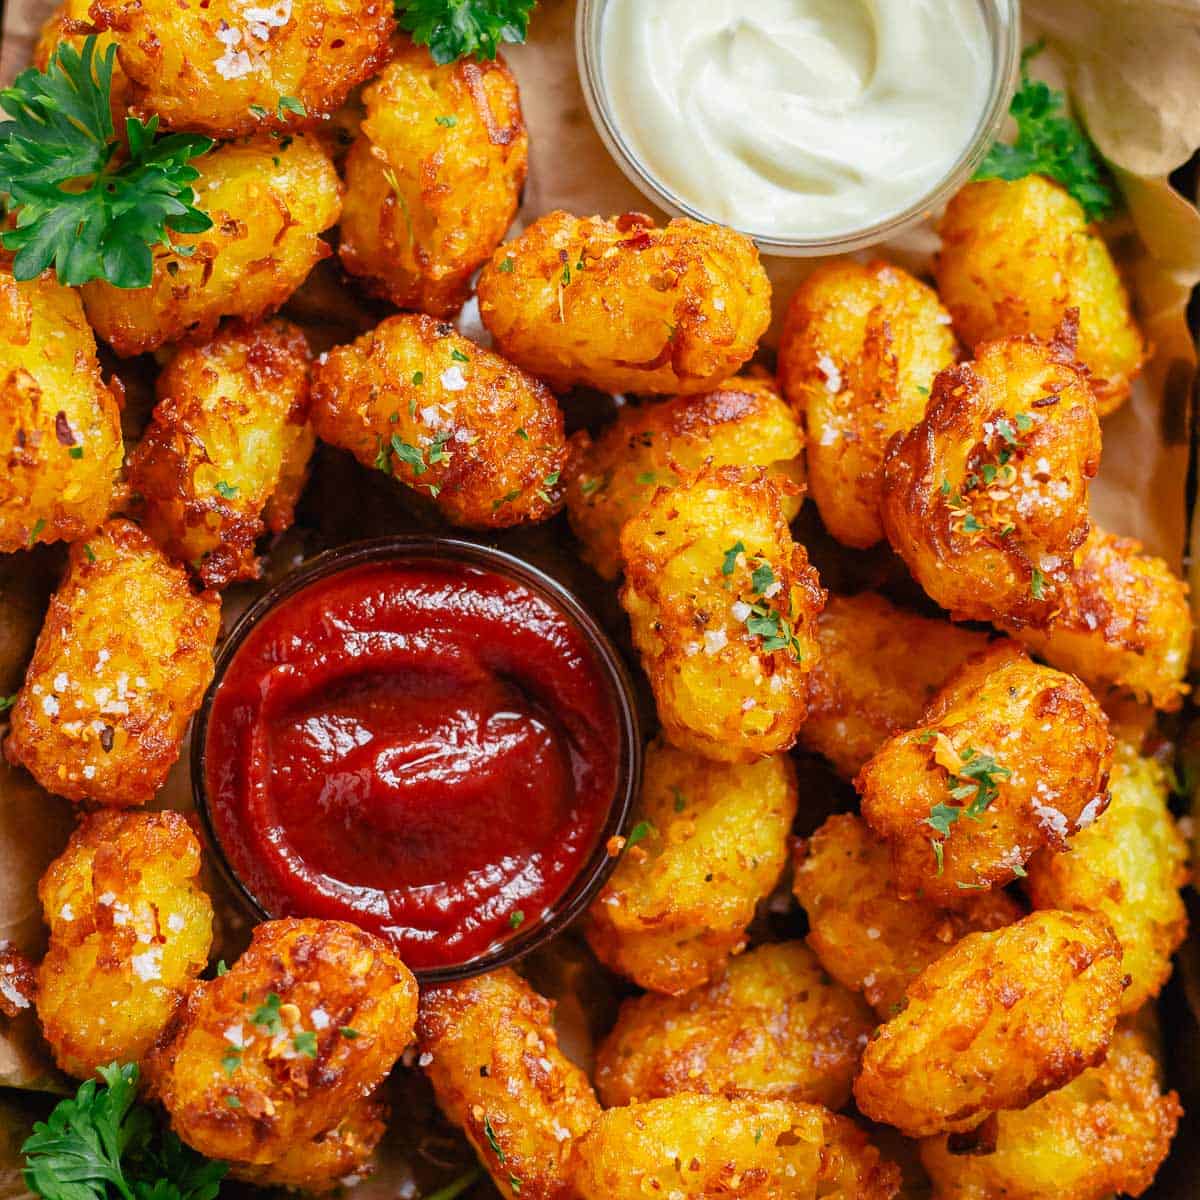 Homemade Gluten Free Tater Tots - The Yummy Bowl